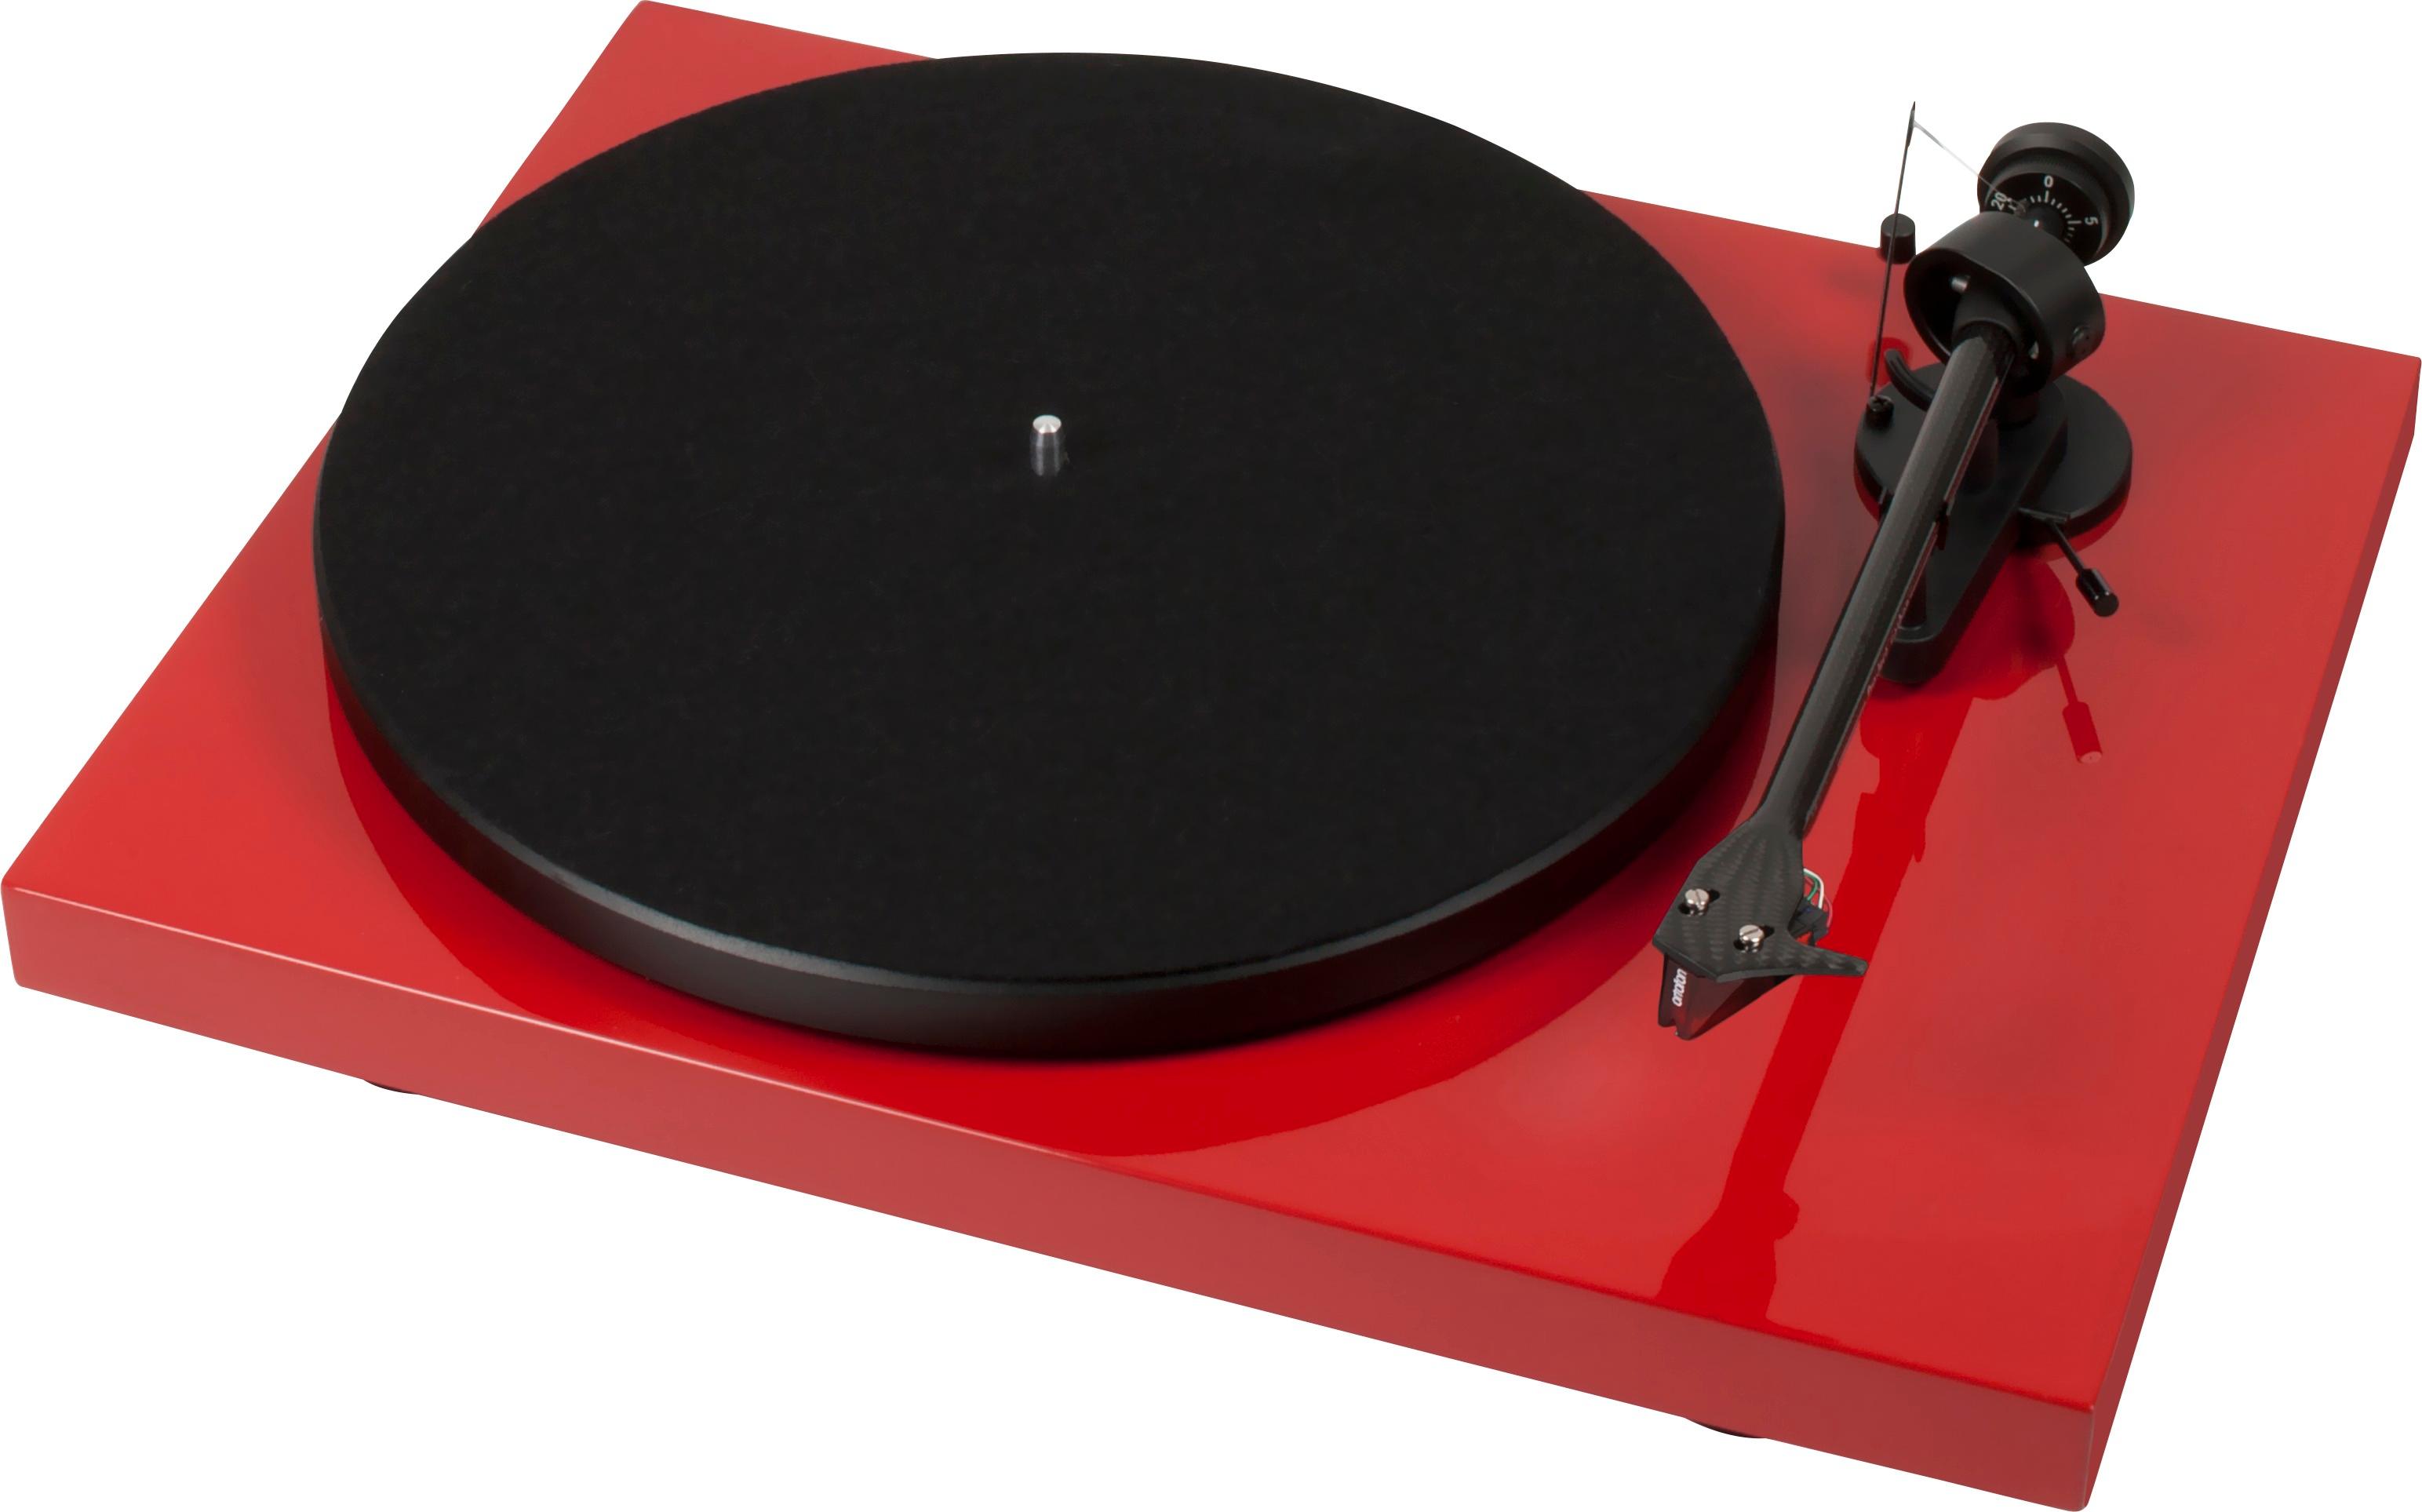 Pro-Ject Debut Stereo Turntable Shine red DEBUT CARBON DC RED - Best Buy